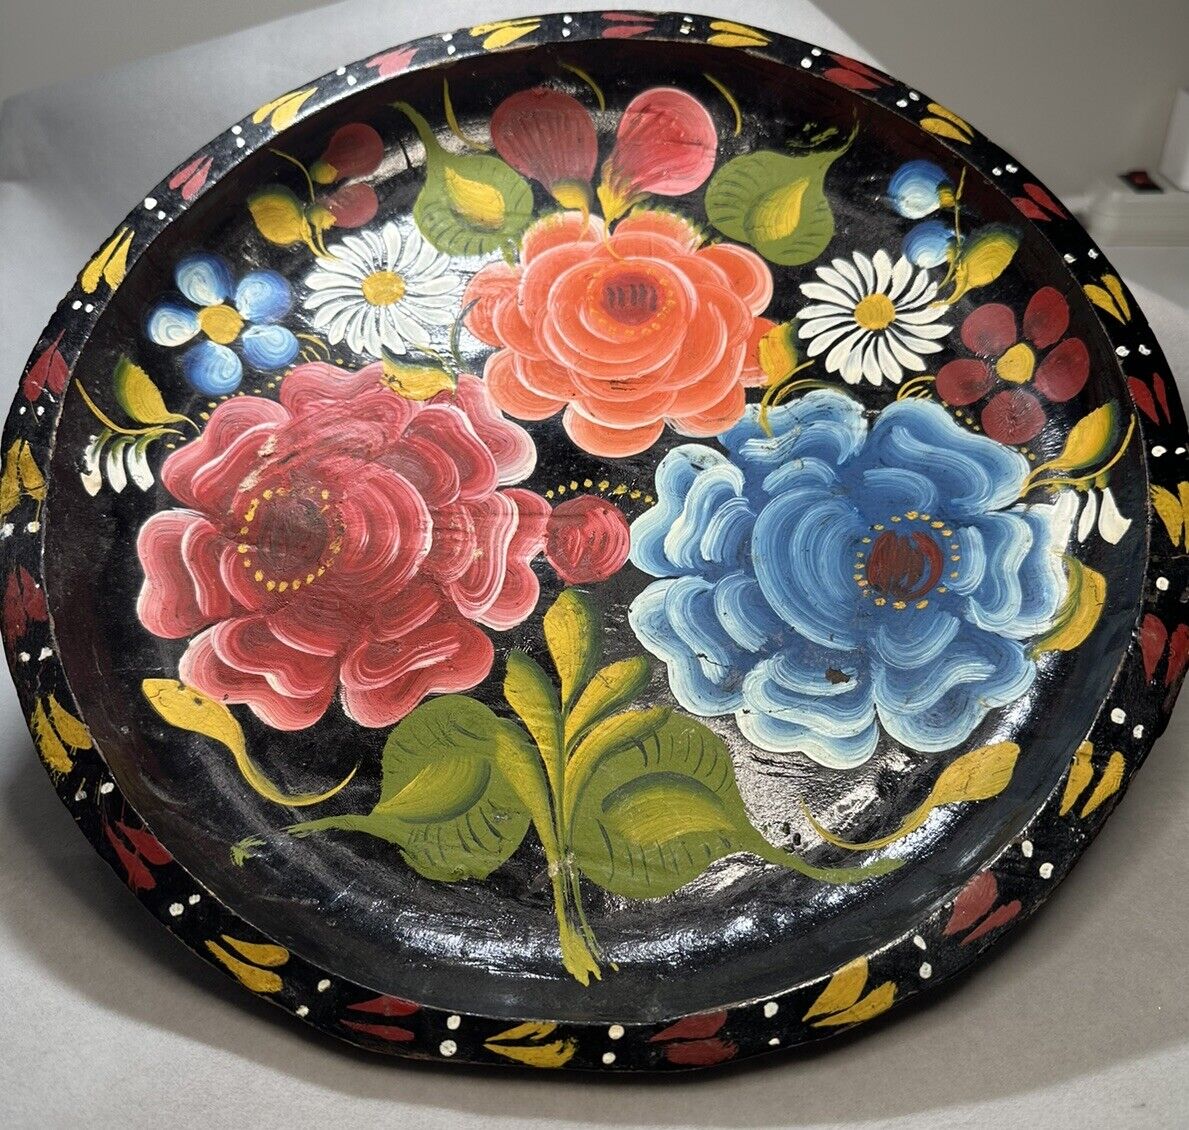 Colorful Mexican Hand Painted Batea Tole Tray Vintage Wood Folk Art Bowl 11 Inch